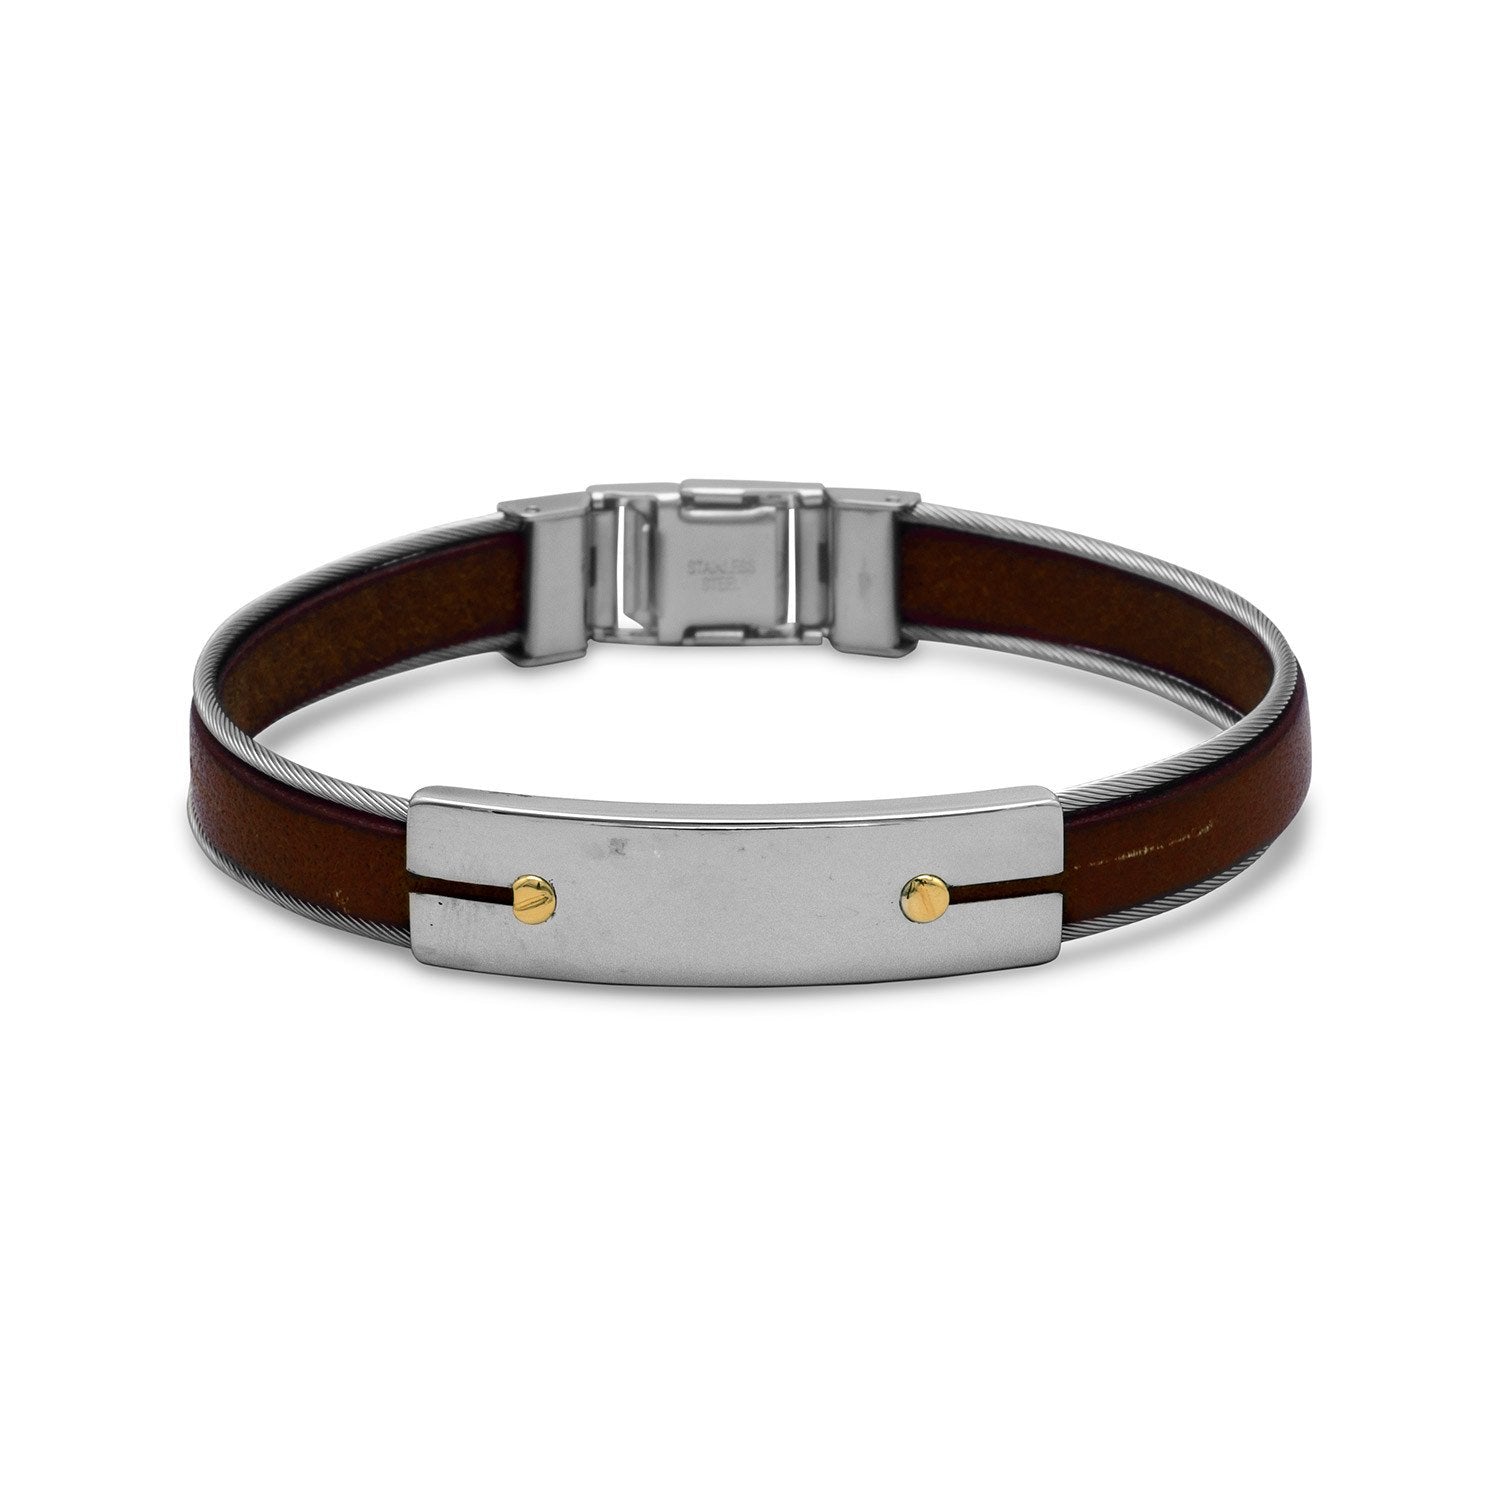 8.5" Stainless Steel and Leather Men's Bracelet with 18 Karat Gold Accents